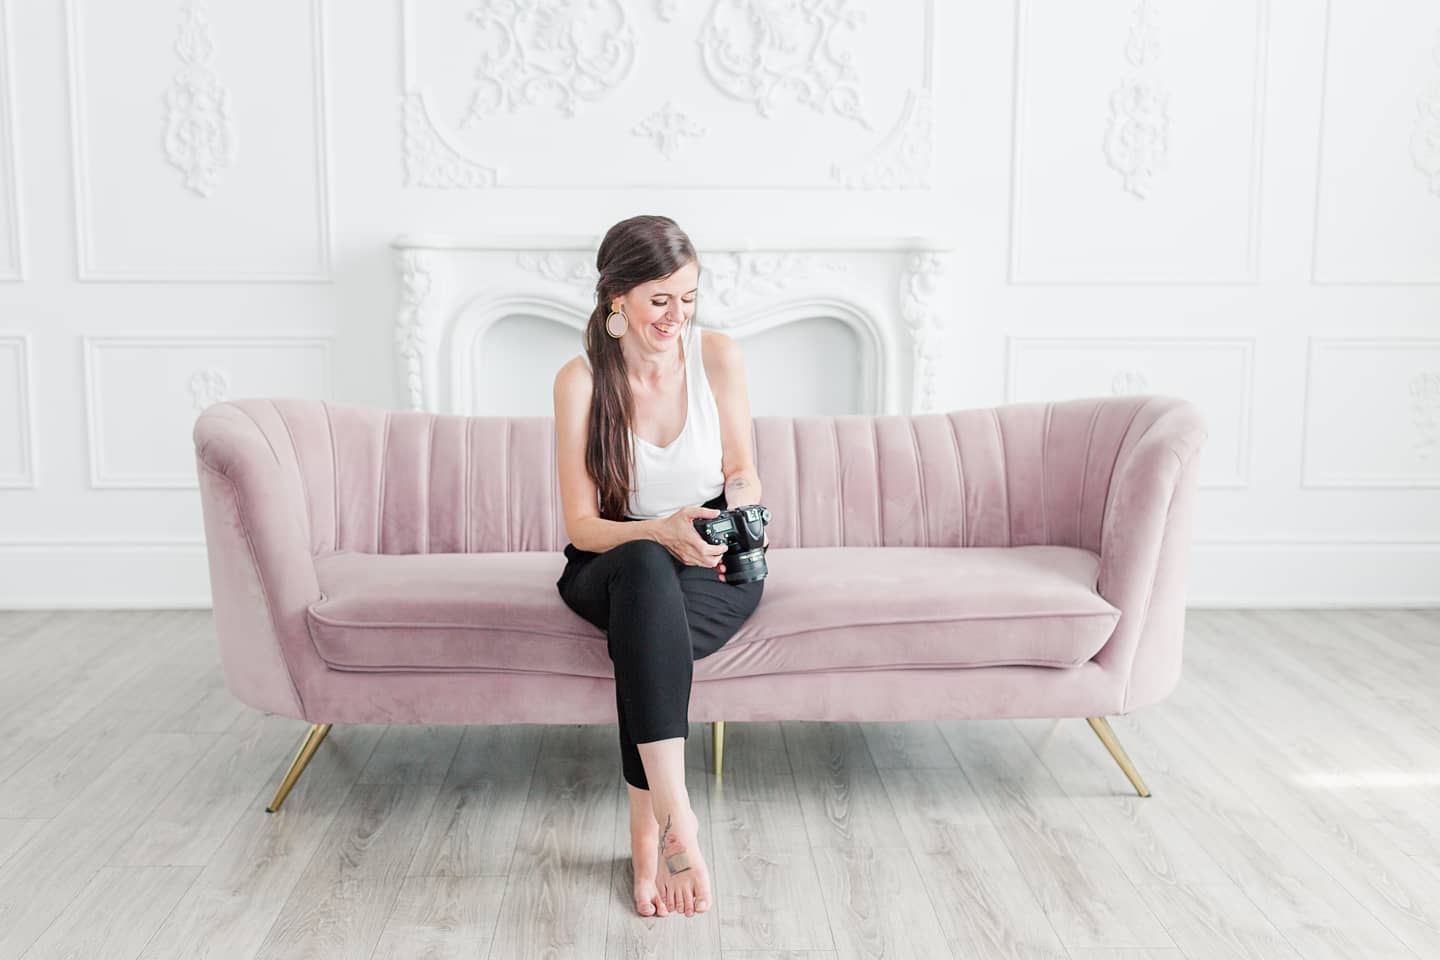 Sandra, Toronto Wedding Photographer and owner of Life is Beautiful Photography, sits on a light pink couch in a room with white walls and light wood floors. She is laughing while looking down at a camera she's holding.